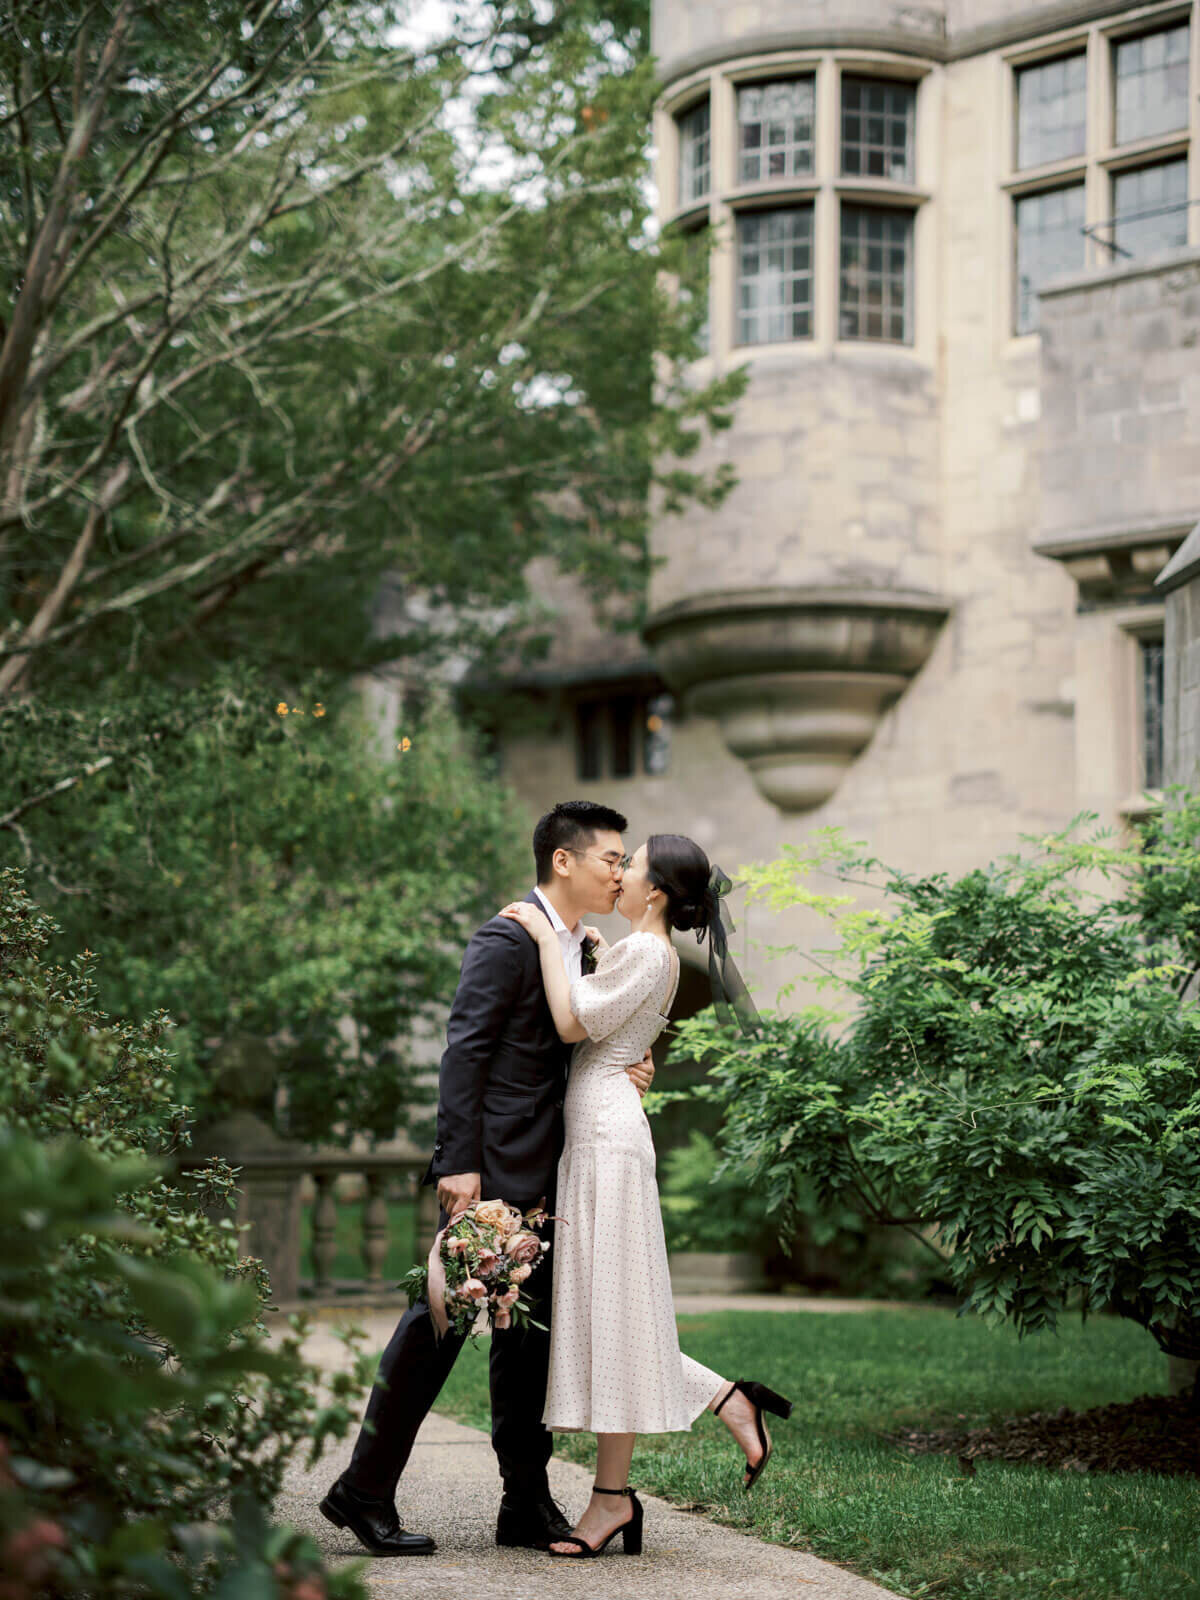 The engaged couple is kissing outside Coe Hall at Planting Fields Arboretum, NY, amidst lush greenery. Image by Jenny Fu Studio